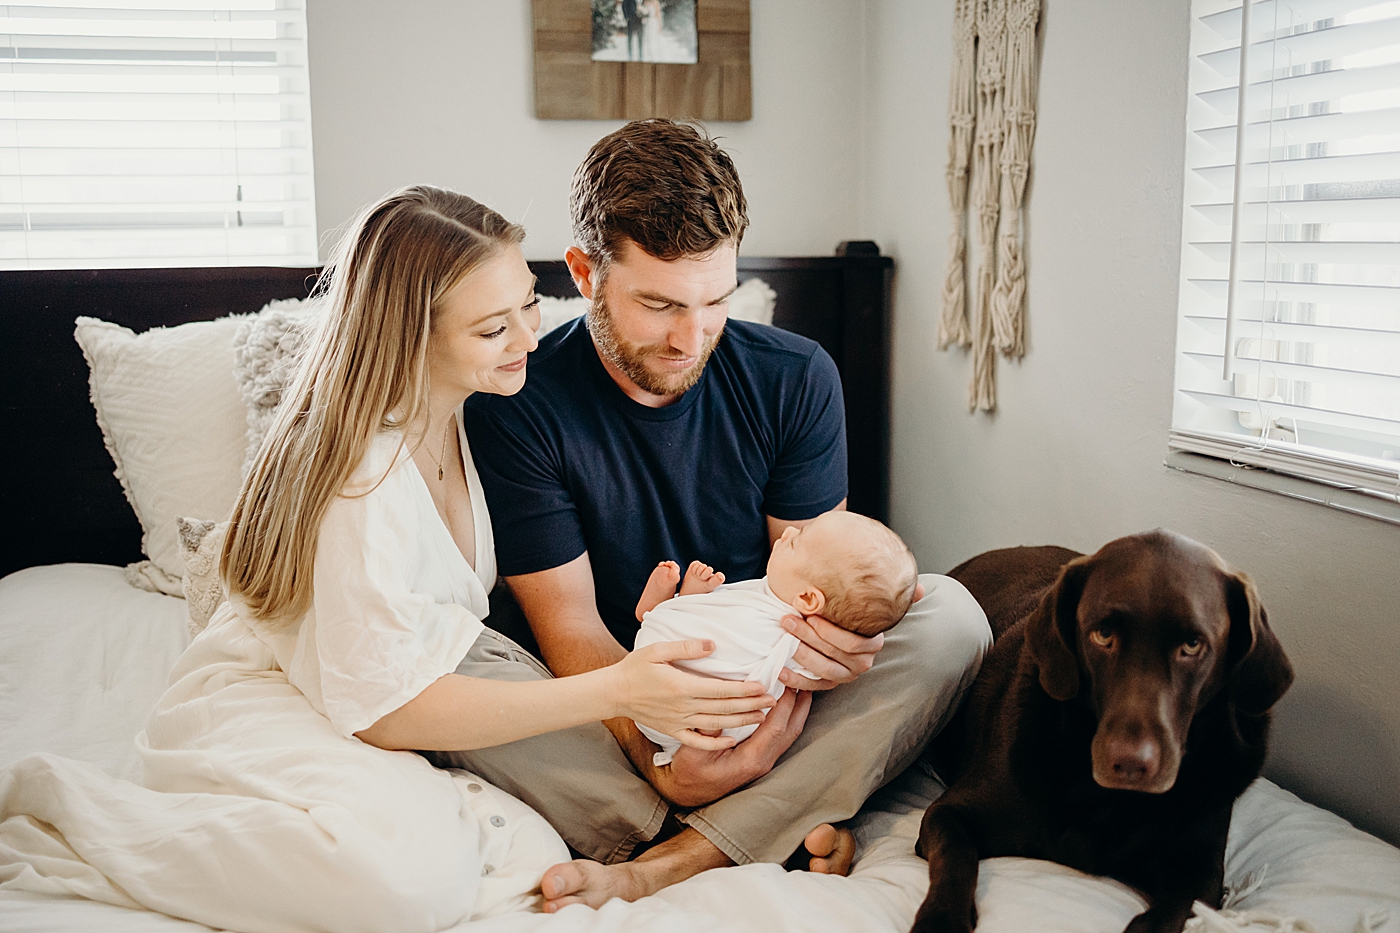 Parents looking at swaddled baby with dog next to them on the bed South Florida Newborn Photography captured by South Florida Family Photographer Maggie Alvarez Photography